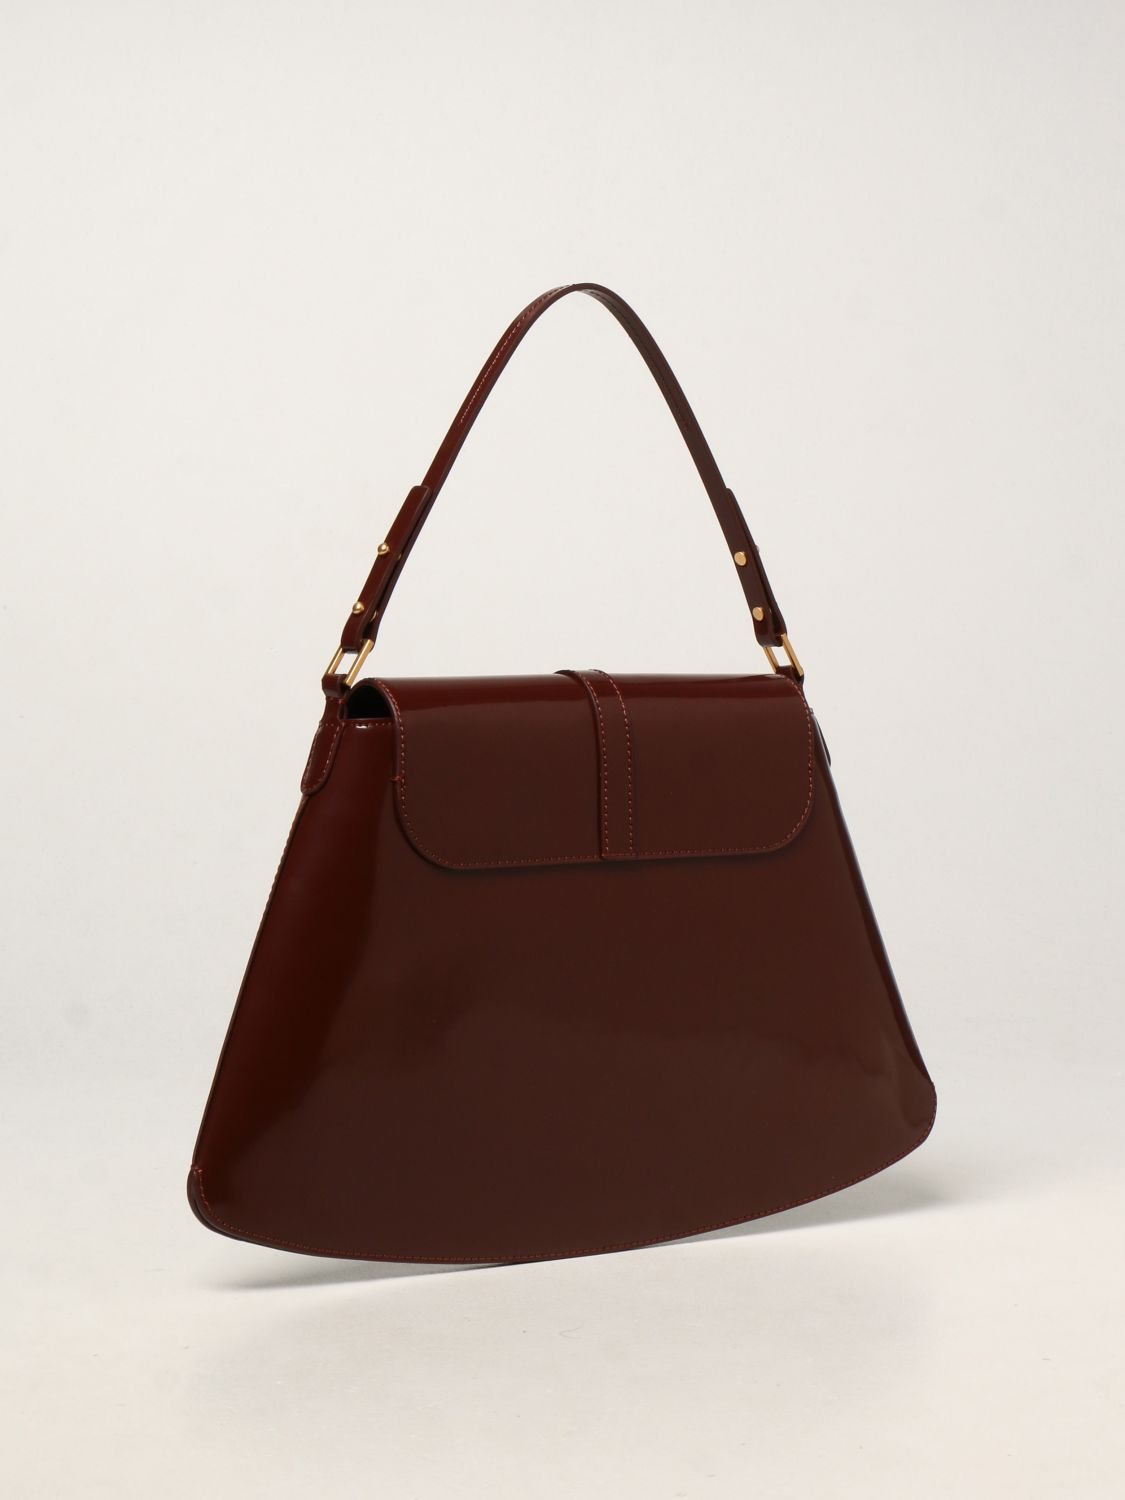 Handbag By Far: Portia By Far bag in brushed leather brown 2